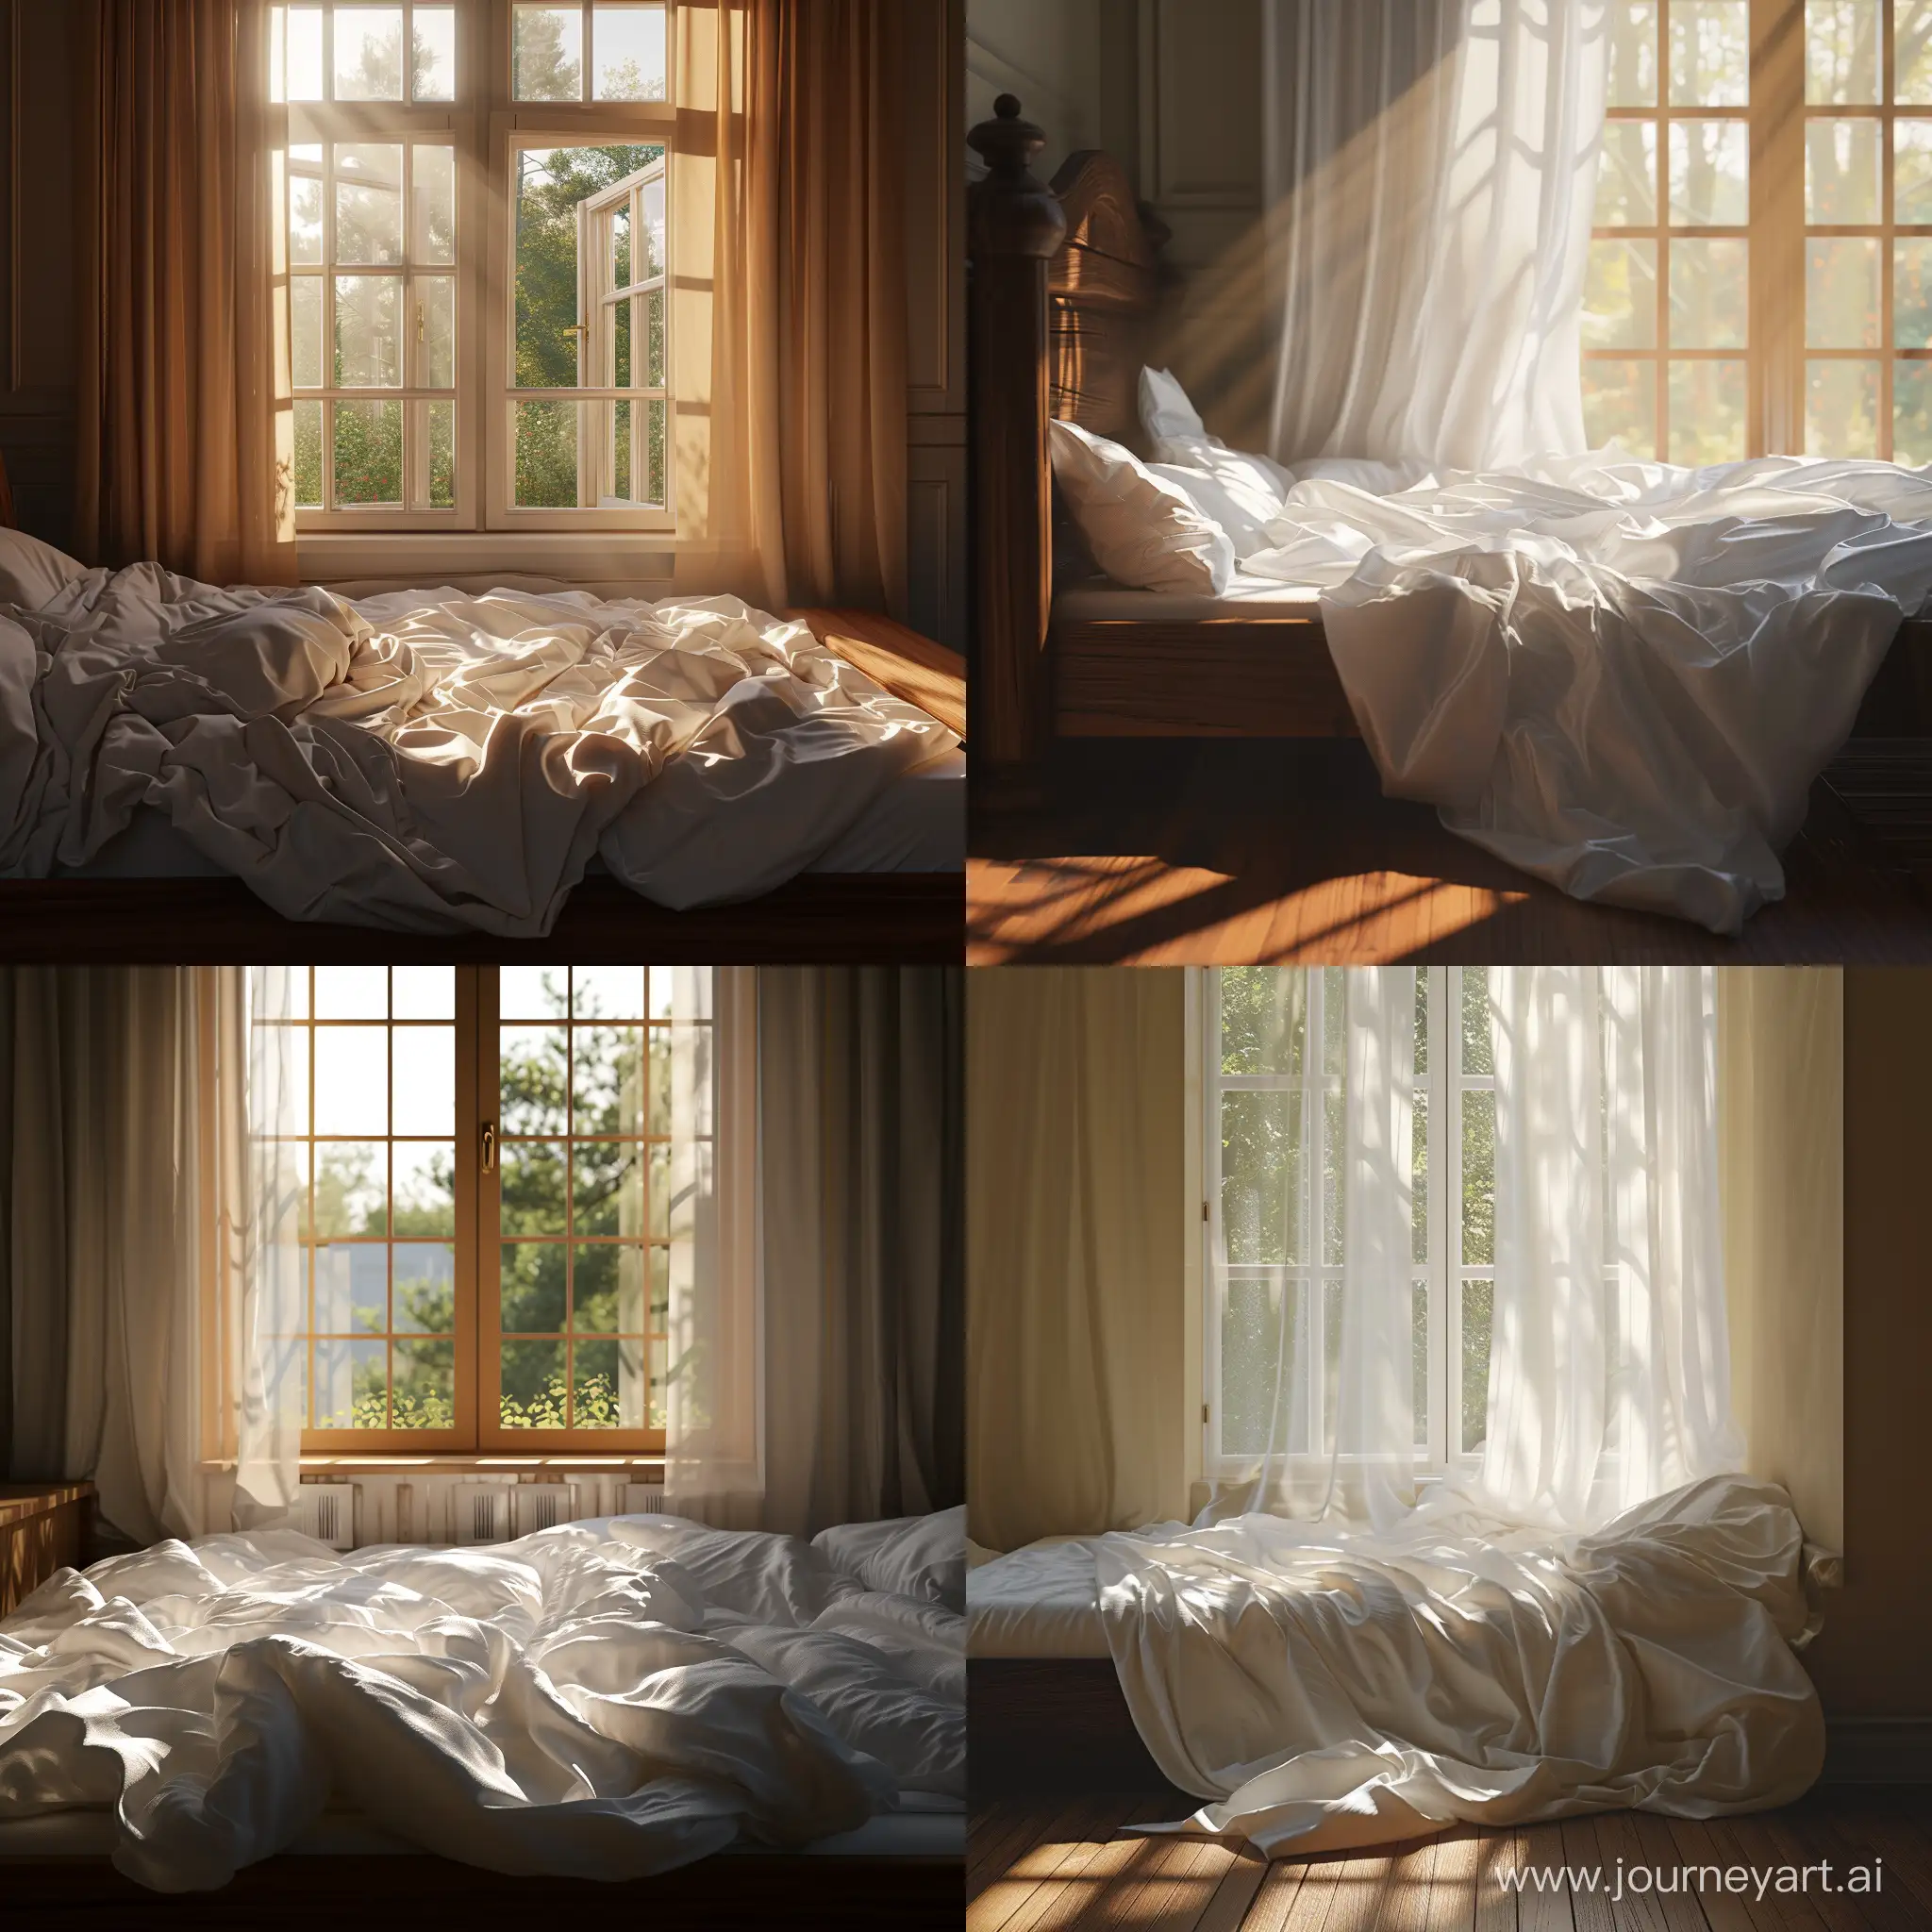 Inviting-Morning-Atmosphere-in-a-Oakthemed-Bedroom-with-Sunlight-and-White-Sheets